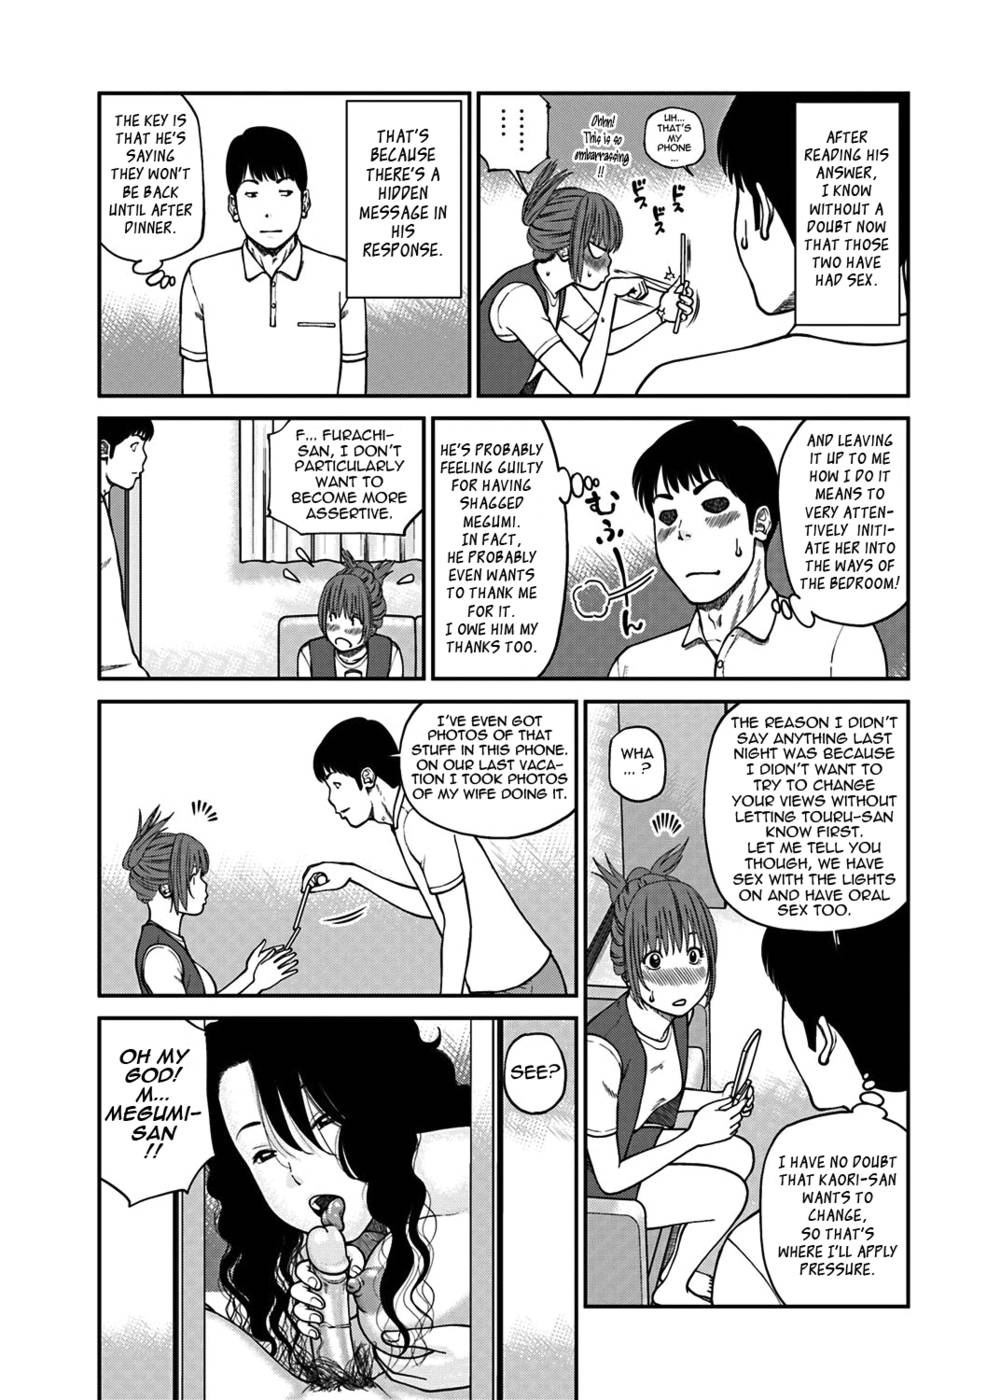 33 Year Old Unsatisfied Wife-Chapter 3-Spouse Swapping-Second Day-Hentai Manga Hentai Comic pic